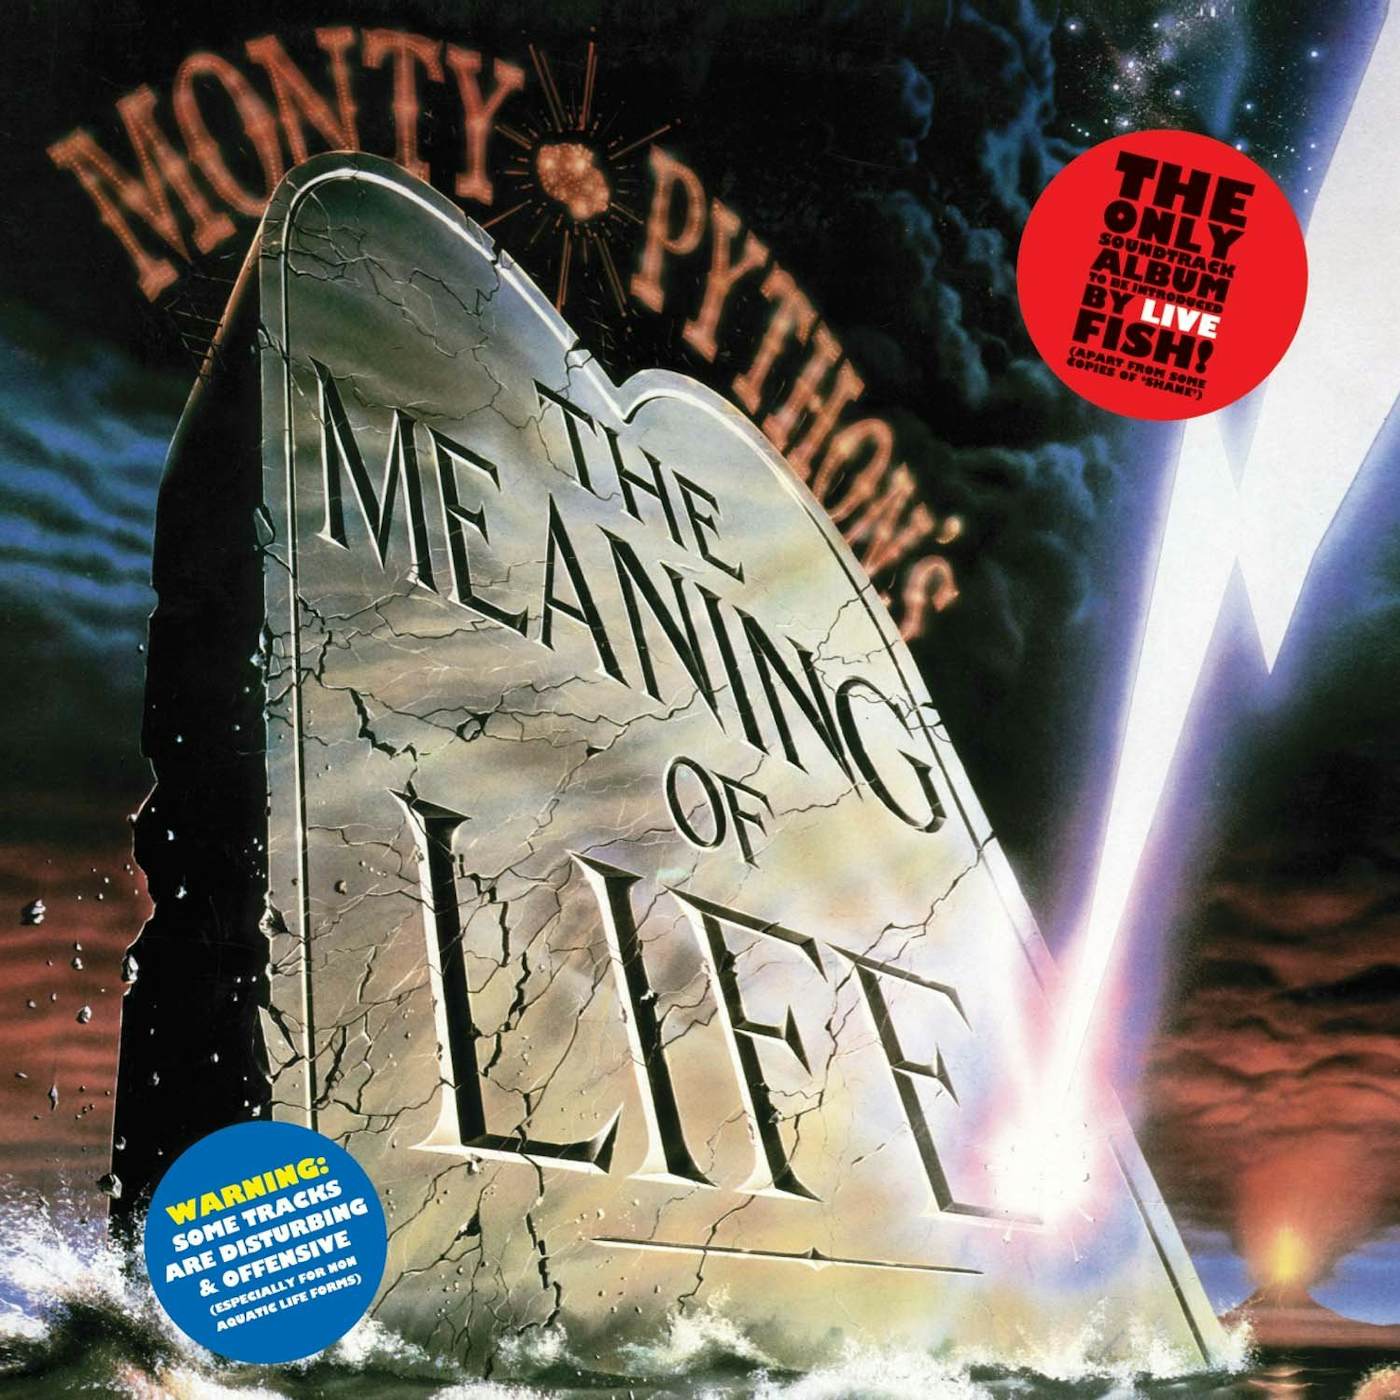 Monty Python MEANING OF LIFE CD